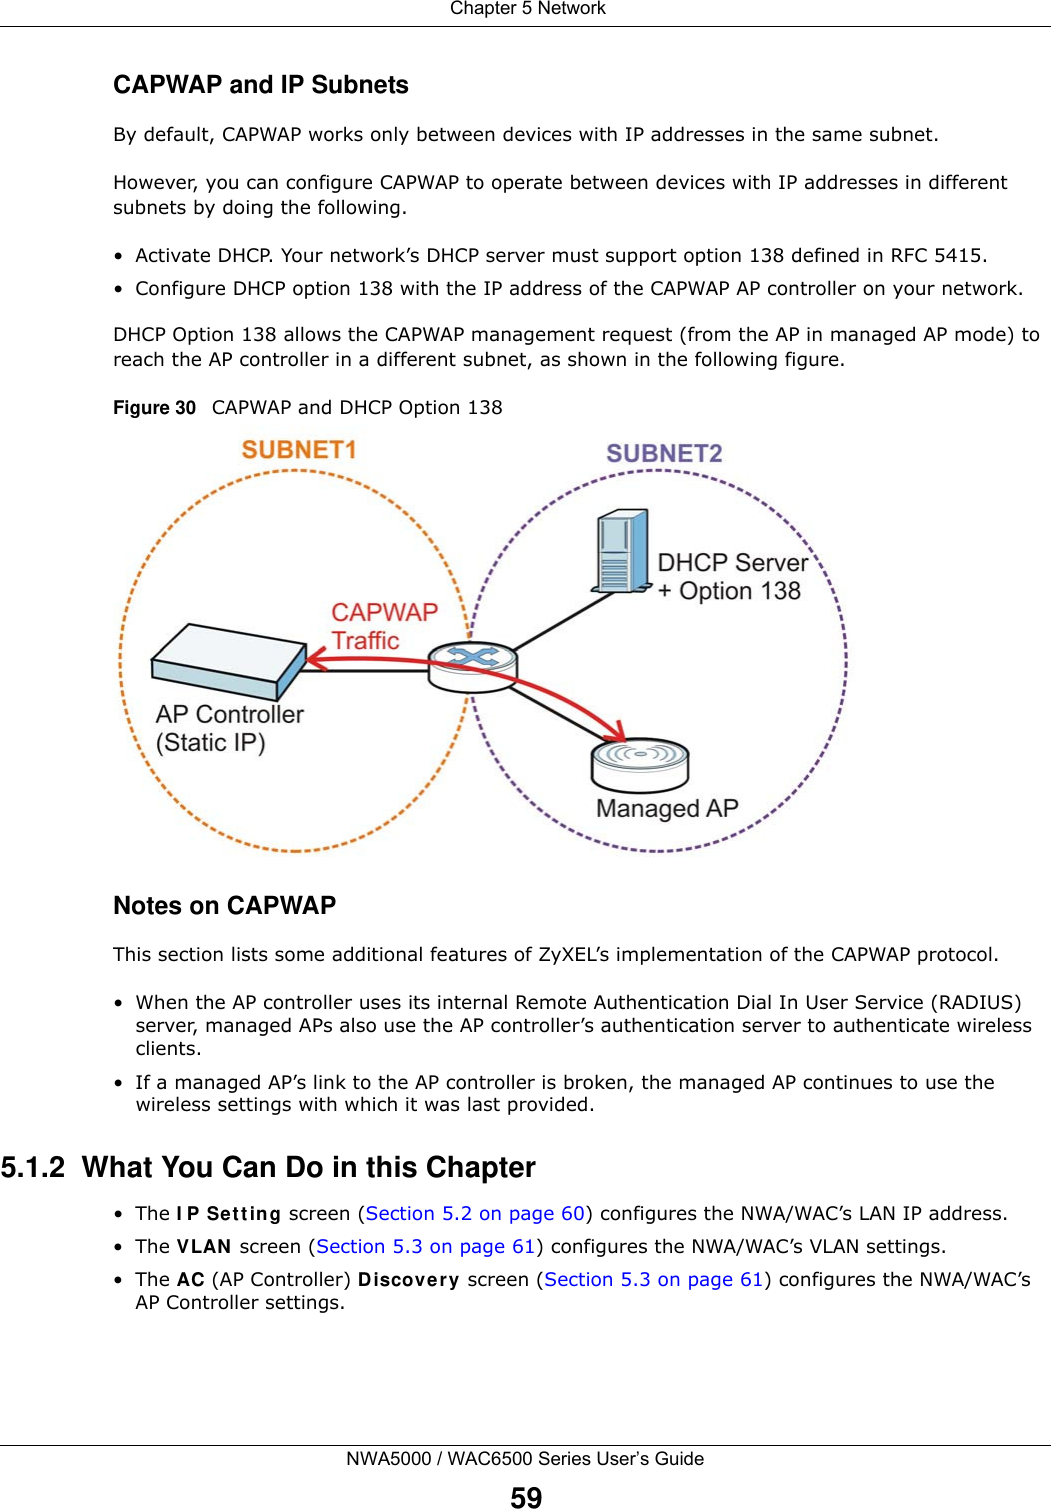  Chapter 5 NetworkNWA5000 / WAC6500 Series User’s Guide59CAPWAP and IP SubnetsBy default, CAPWAP works only between devices with IP addresses in the same subnet. However, you can configure CAPWAP to operate between devices with IP addresses in different subnets by doing the following.• Activate DHCP. Your network’s DHCP server must support option 138 defined in RFC 5415.• Configure DHCP option 138 with the IP address of the CAPWAP AP controller on your network.DHCP Option 138 allows the CAPWAP management request (from the AP in managed AP mode) to reach the AP controller in a different subnet, as shown in the following figure.Figure 30   CAPWAP and DHCP Option 138 Notes on CAPWAPThis section lists some additional features of ZyXEL’s implementation of the CAPWAP protocol.• When the AP controller uses its internal Remote Authentication Dial In User Service (RADIUS) server, managed APs also use the AP controller’s authentication server to authenticate wireless clients.• If a managed AP’s link to the AP controller is broken, the managed AP continues to use the wireless settings with which it was last provided.5.1.2  What You Can Do in this Chapter•The I P Set ting screen (Section 5.2 on page 60) configures the NWA/WAC’s LAN IP address. •The VLAN  screen (Section 5.3 on page 61) configures the NWA/WAC’s VLAN settings. •The AC (AP Controller) Discover y screen (Section 5.3 on page 61) configures the NWA/WAC’s AP Controller settings.